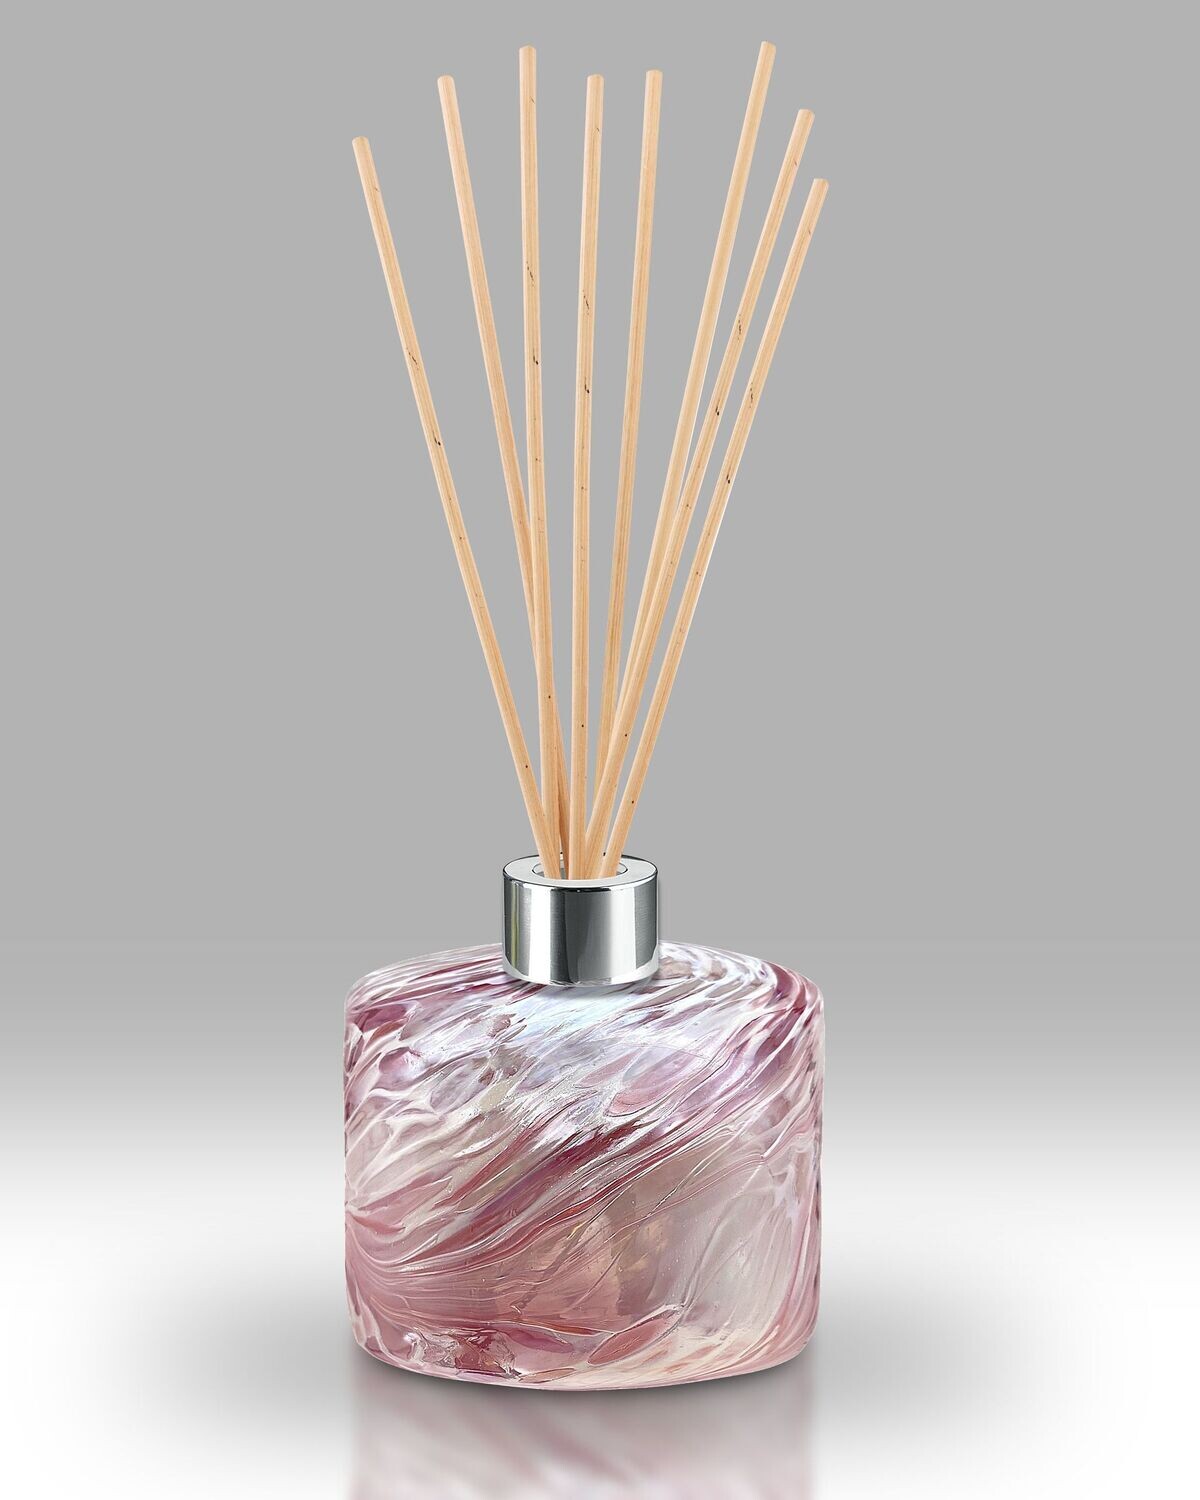 Blossom Friendship Reed Diffuser